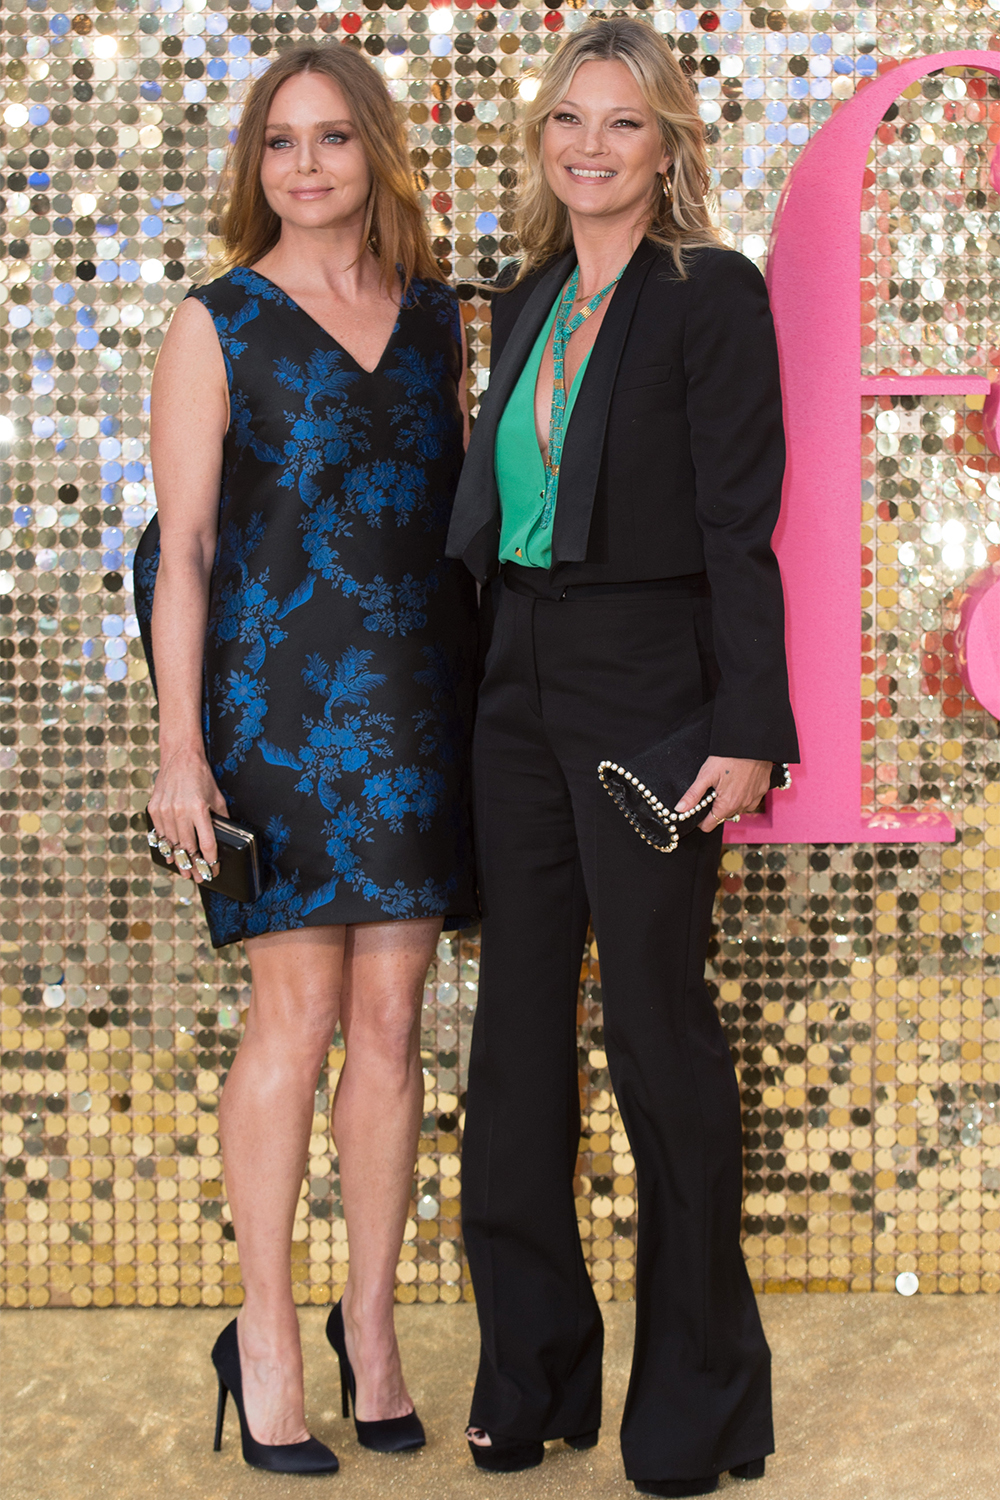 Stella McCartney and Kate Moss at the World Premiere of Absolutely Fabulous in London.